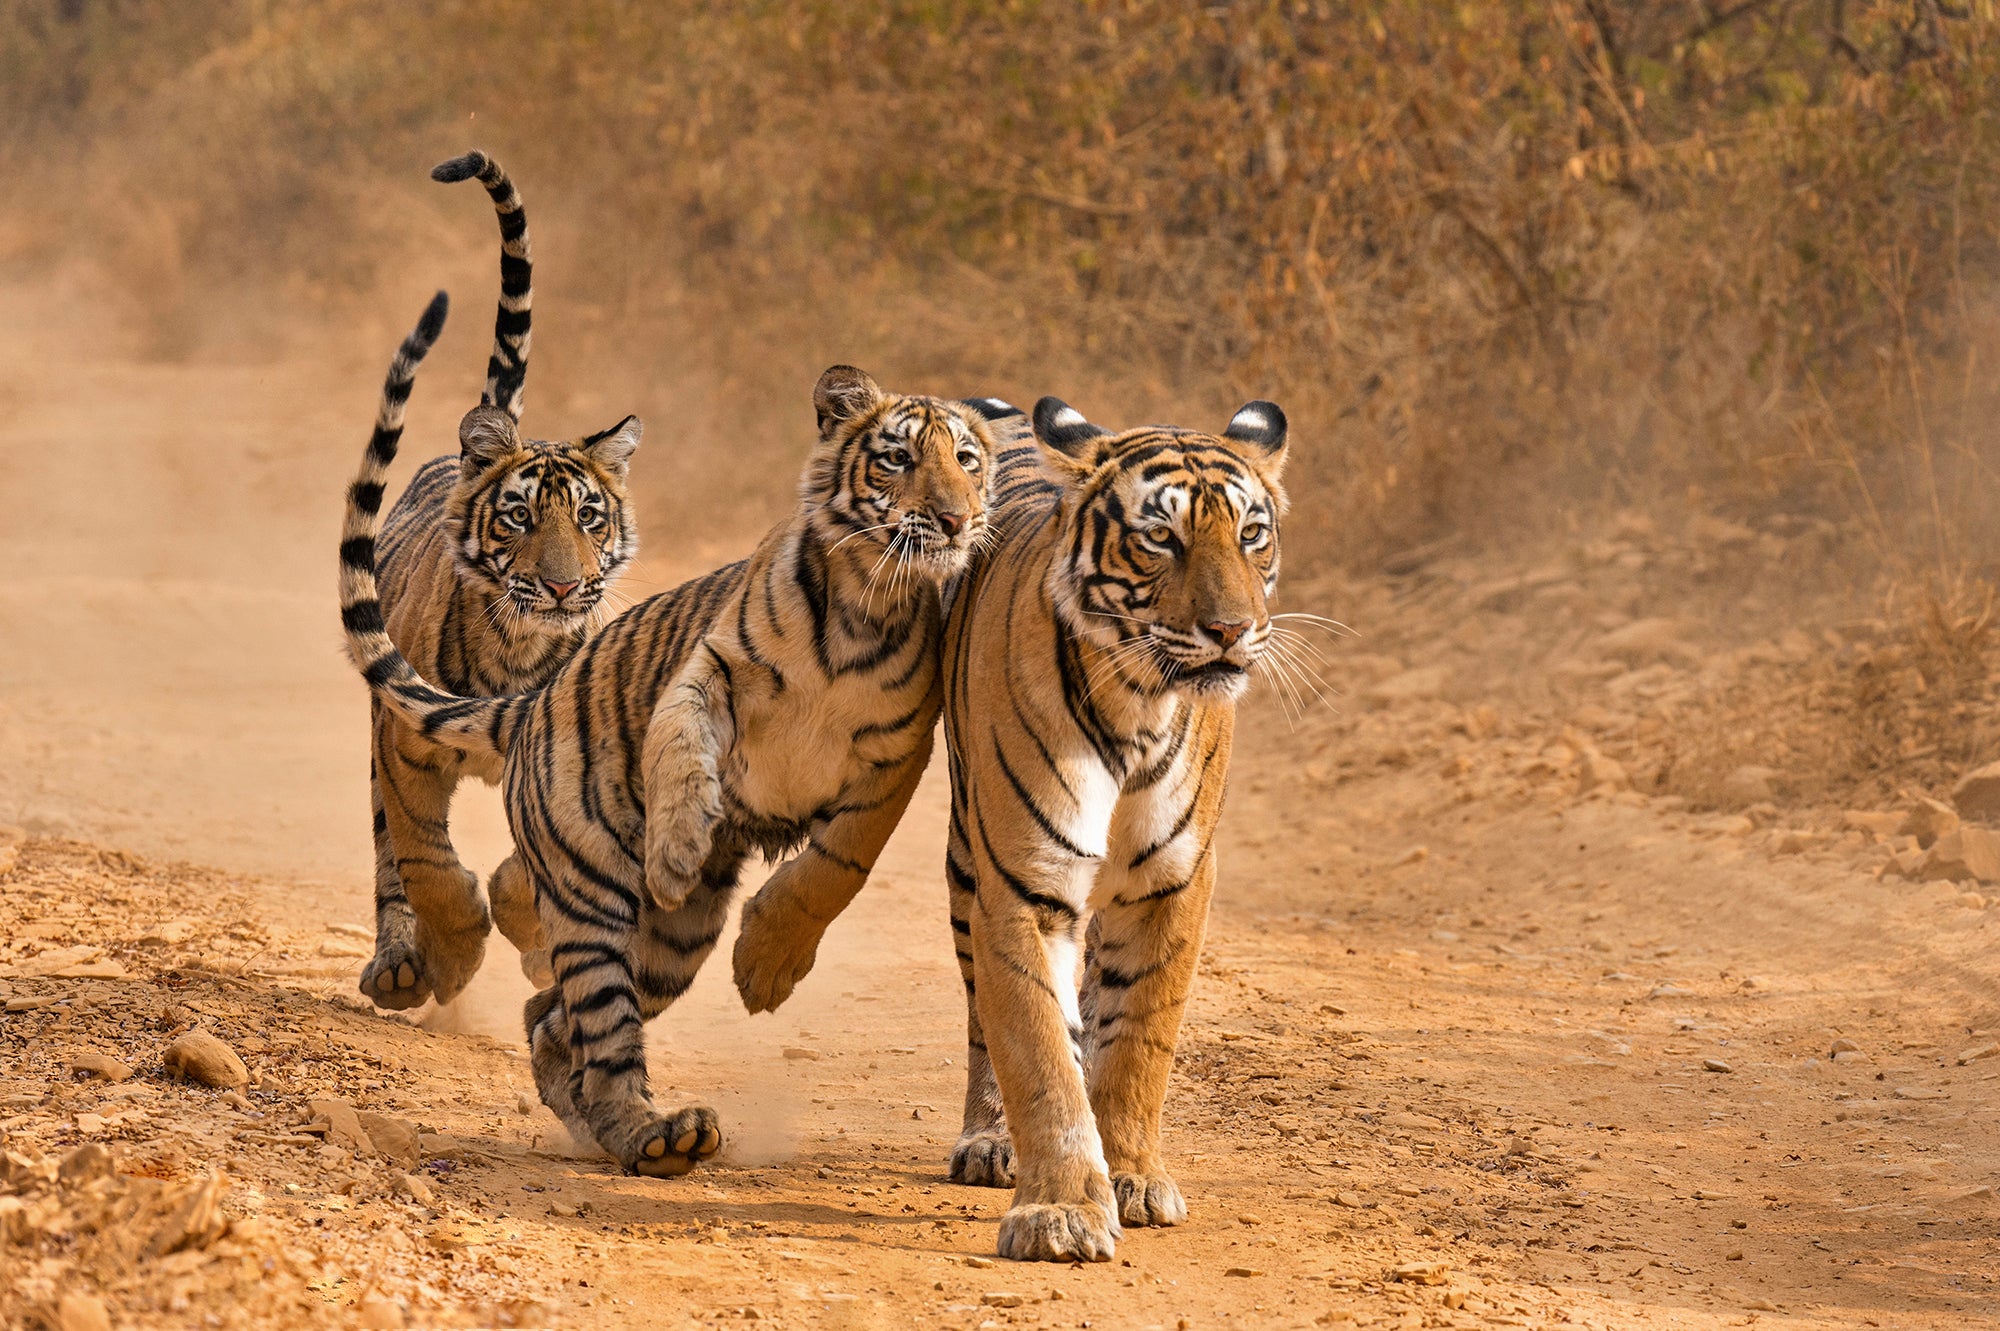 A. mother and two tiger cubs walking on dirt road. The mother is walking towards the camera and one of her cubs is jumping on her tenderly, while the other cub is walking towards them in the background.